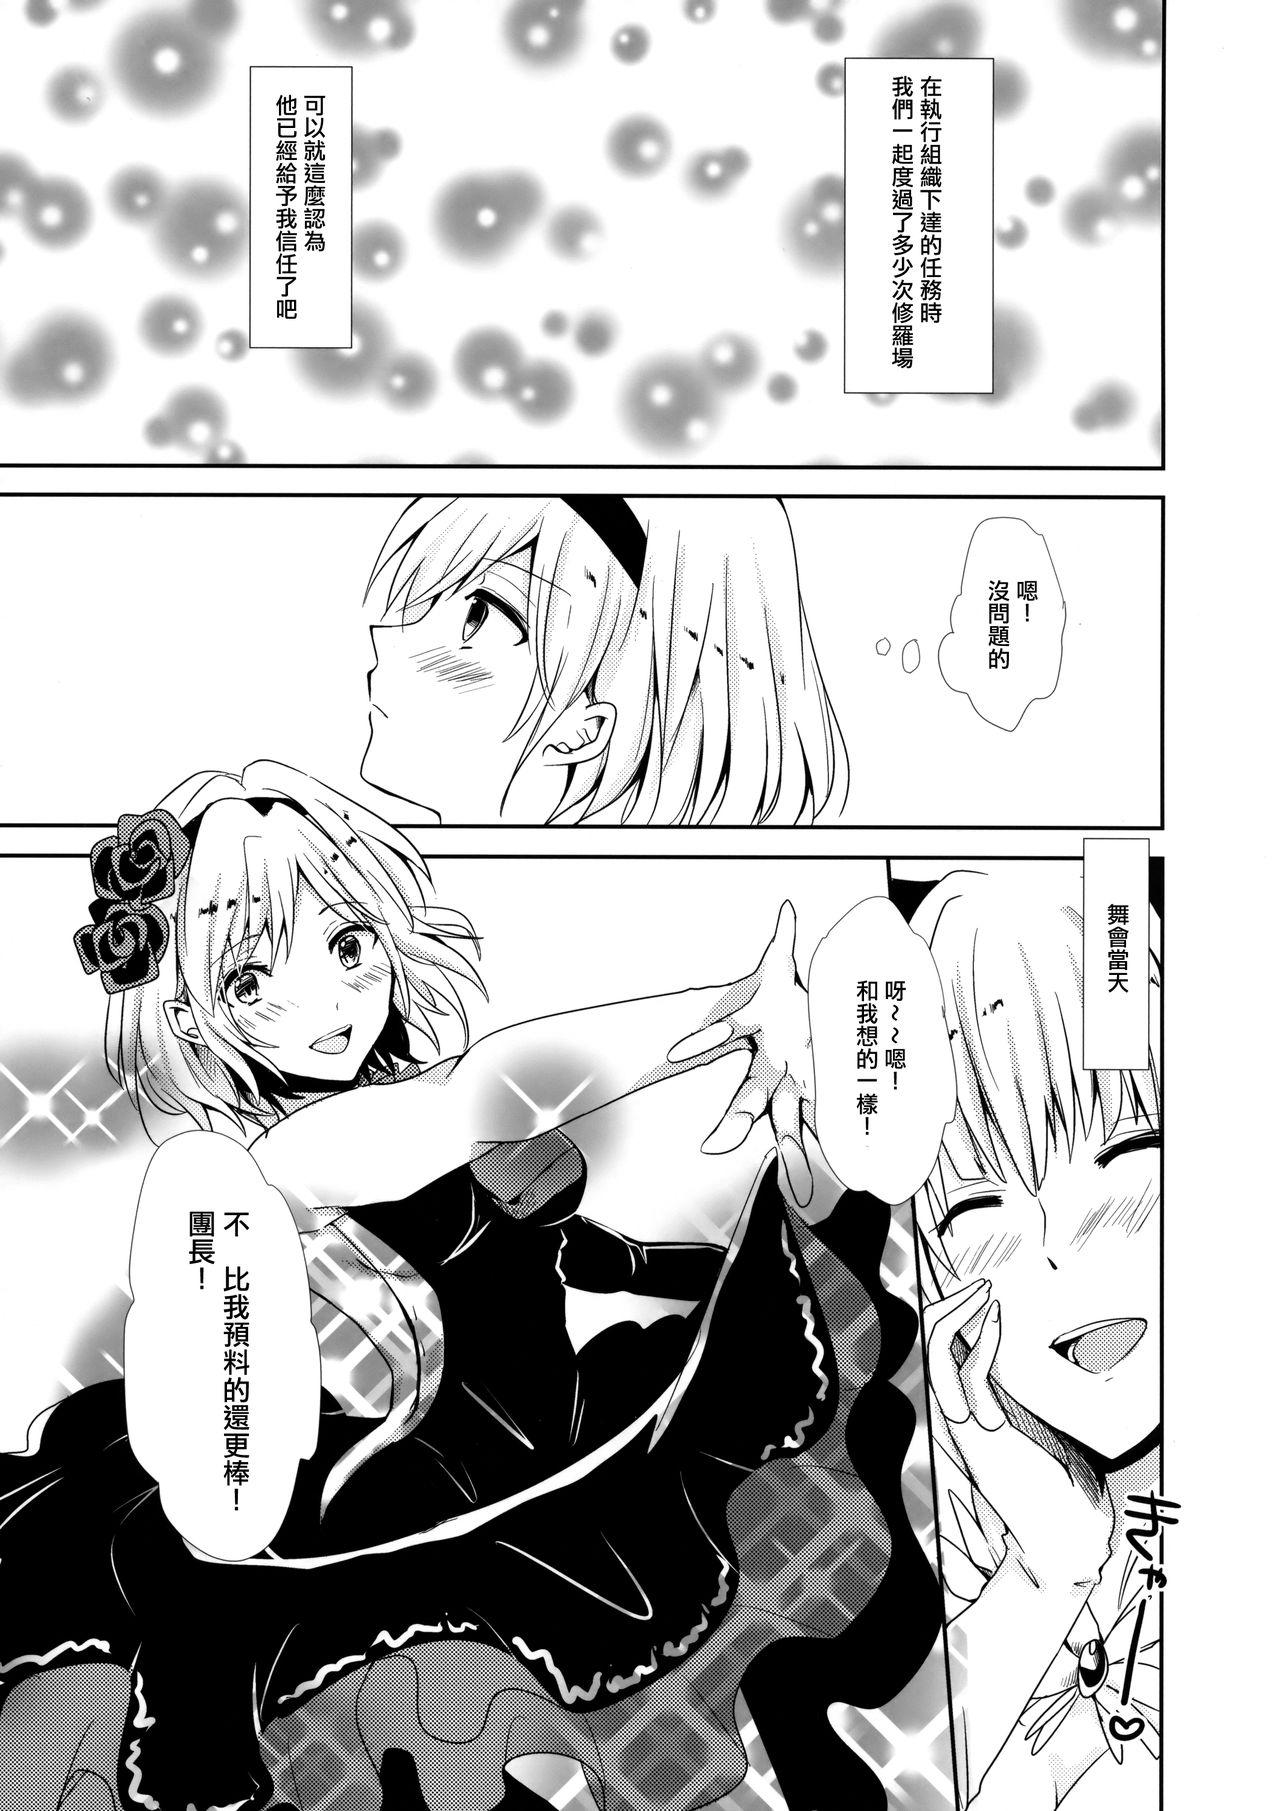 Police Shall We Dance? - Granblue fantasy Clothed Sex - Page 9